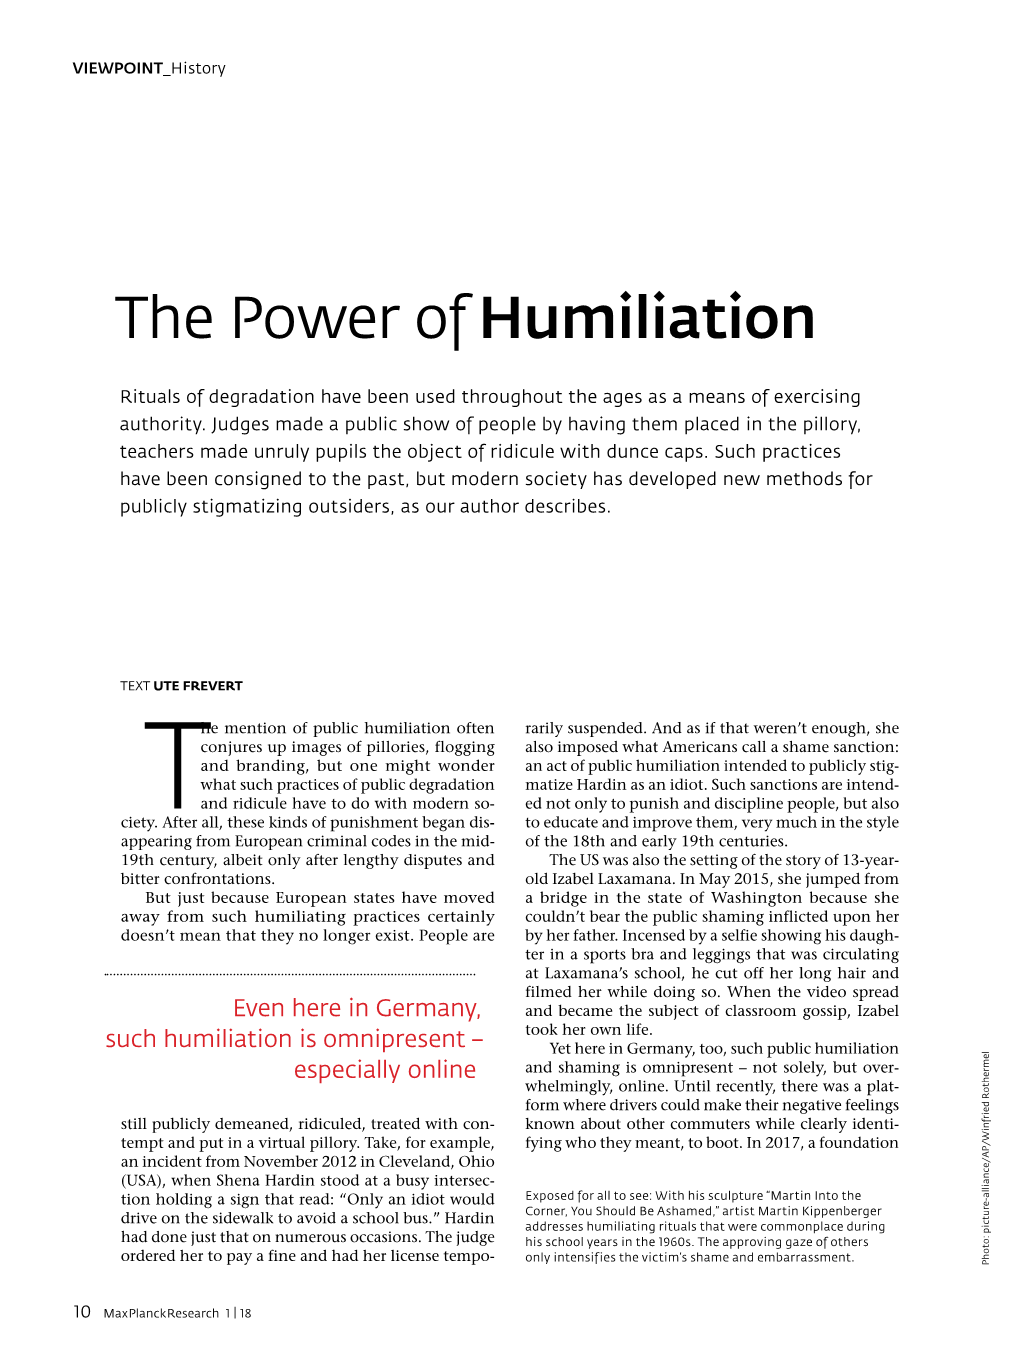 The Power of Humiliation